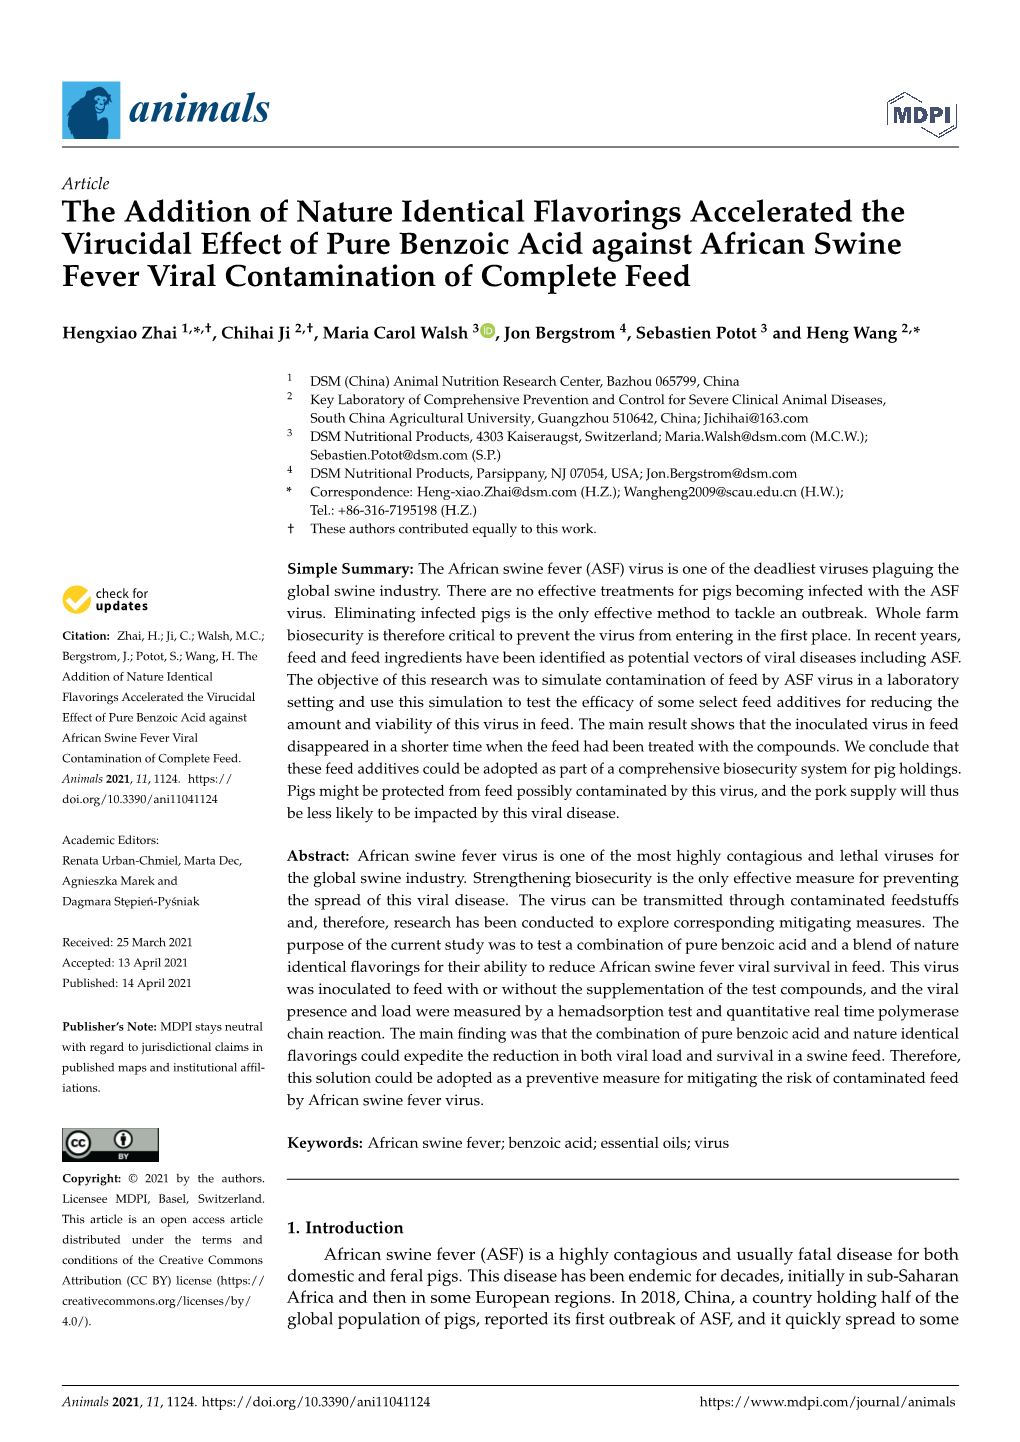 The Addition of Nature Identical Flavorings Accelerated the Virucidal Effect of Pure Benzoic Acid Against African Swine Fever Viral Contamination of Complete Feed